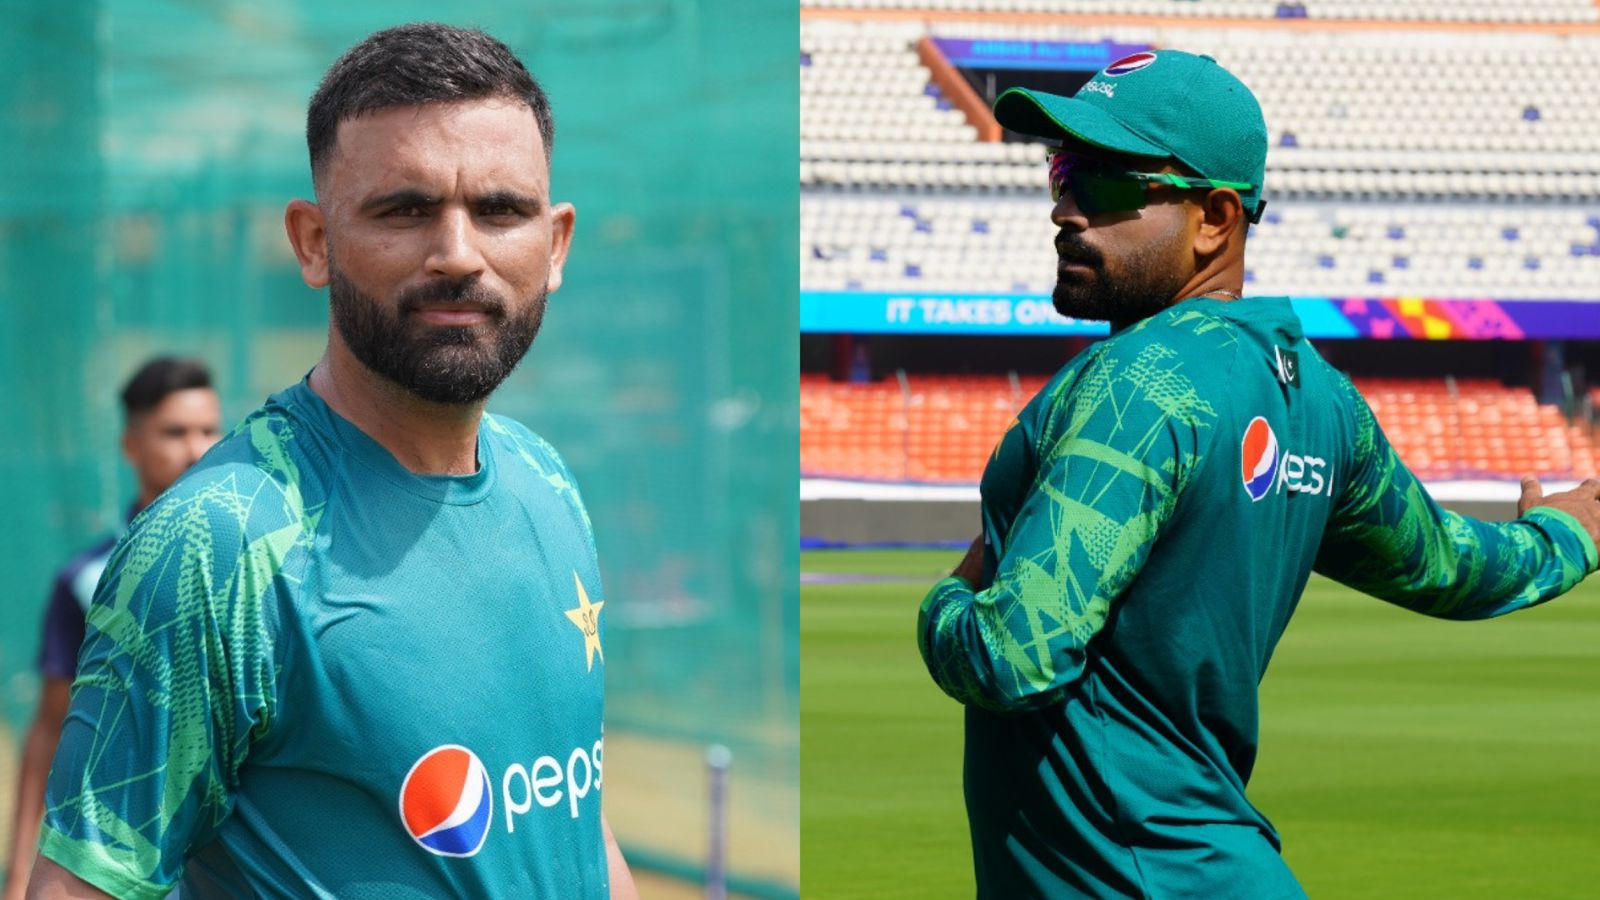 CWC 2023: “Hello Bharat”- Fakhar Zaman shares warm greeting as Pakistan begins training for World Cup